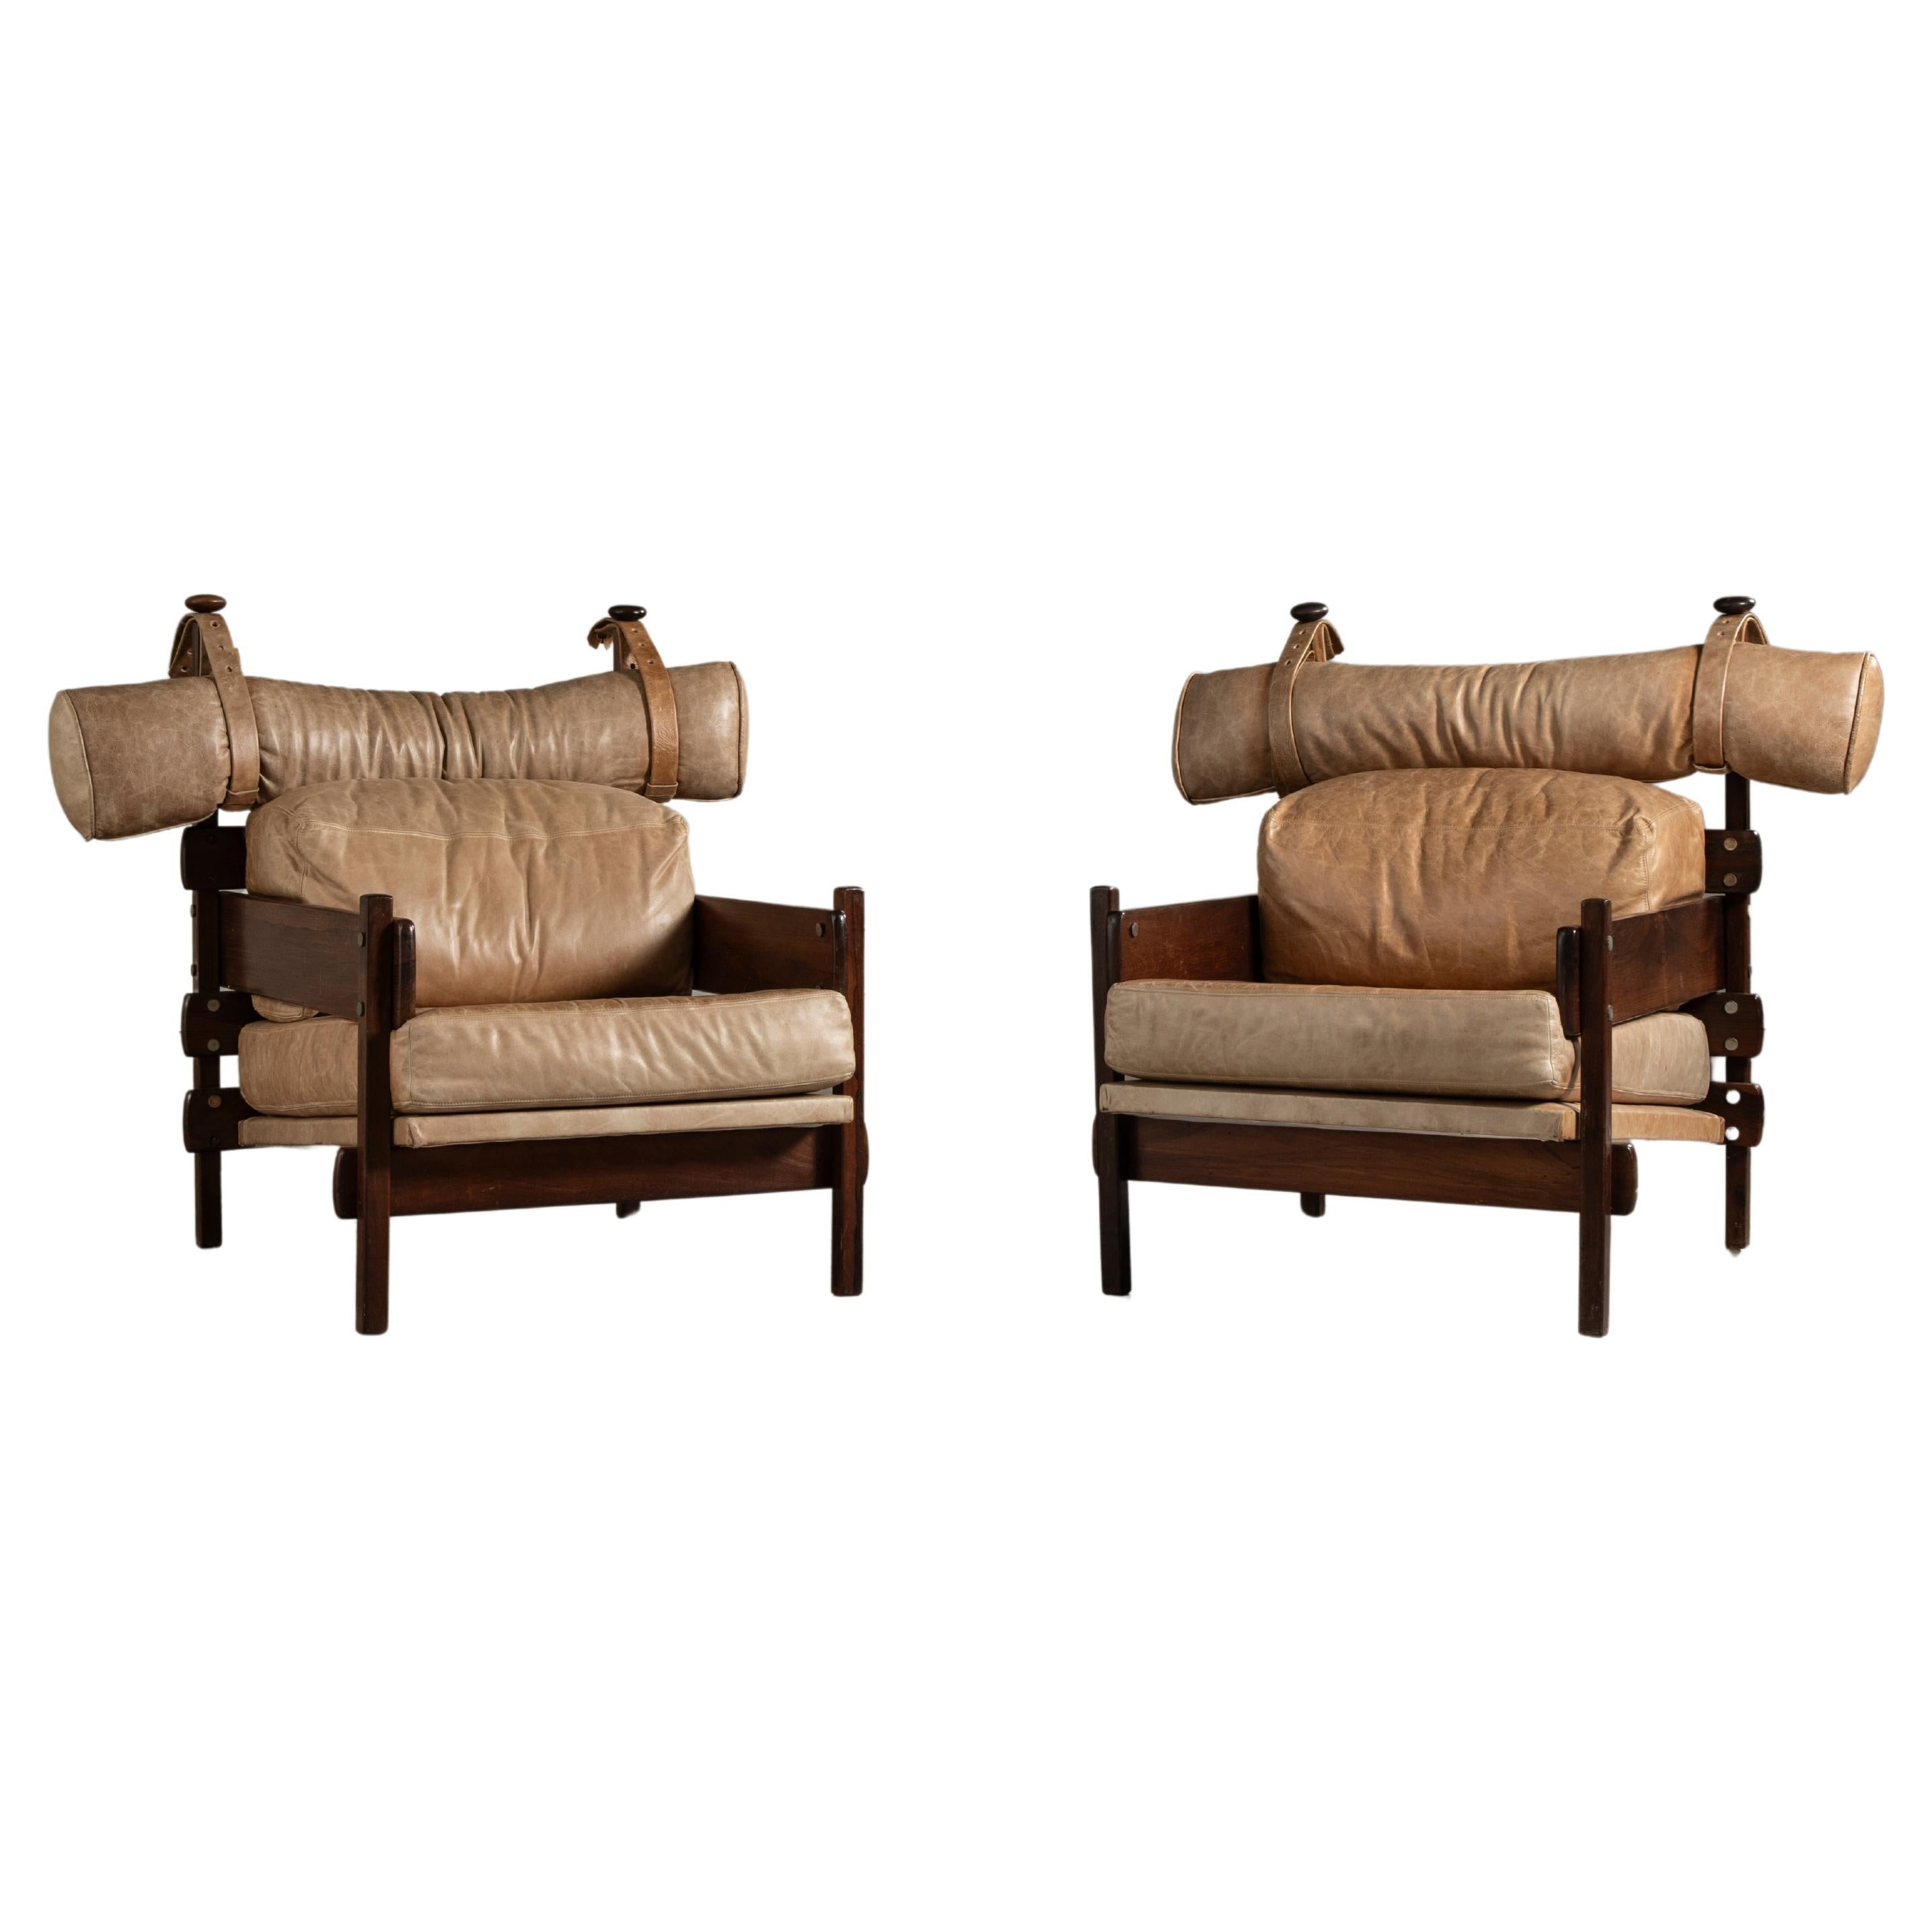 'Franco' Lounge Chairs with headrest, Sergio Rodrigues, Brazilian Modern Design